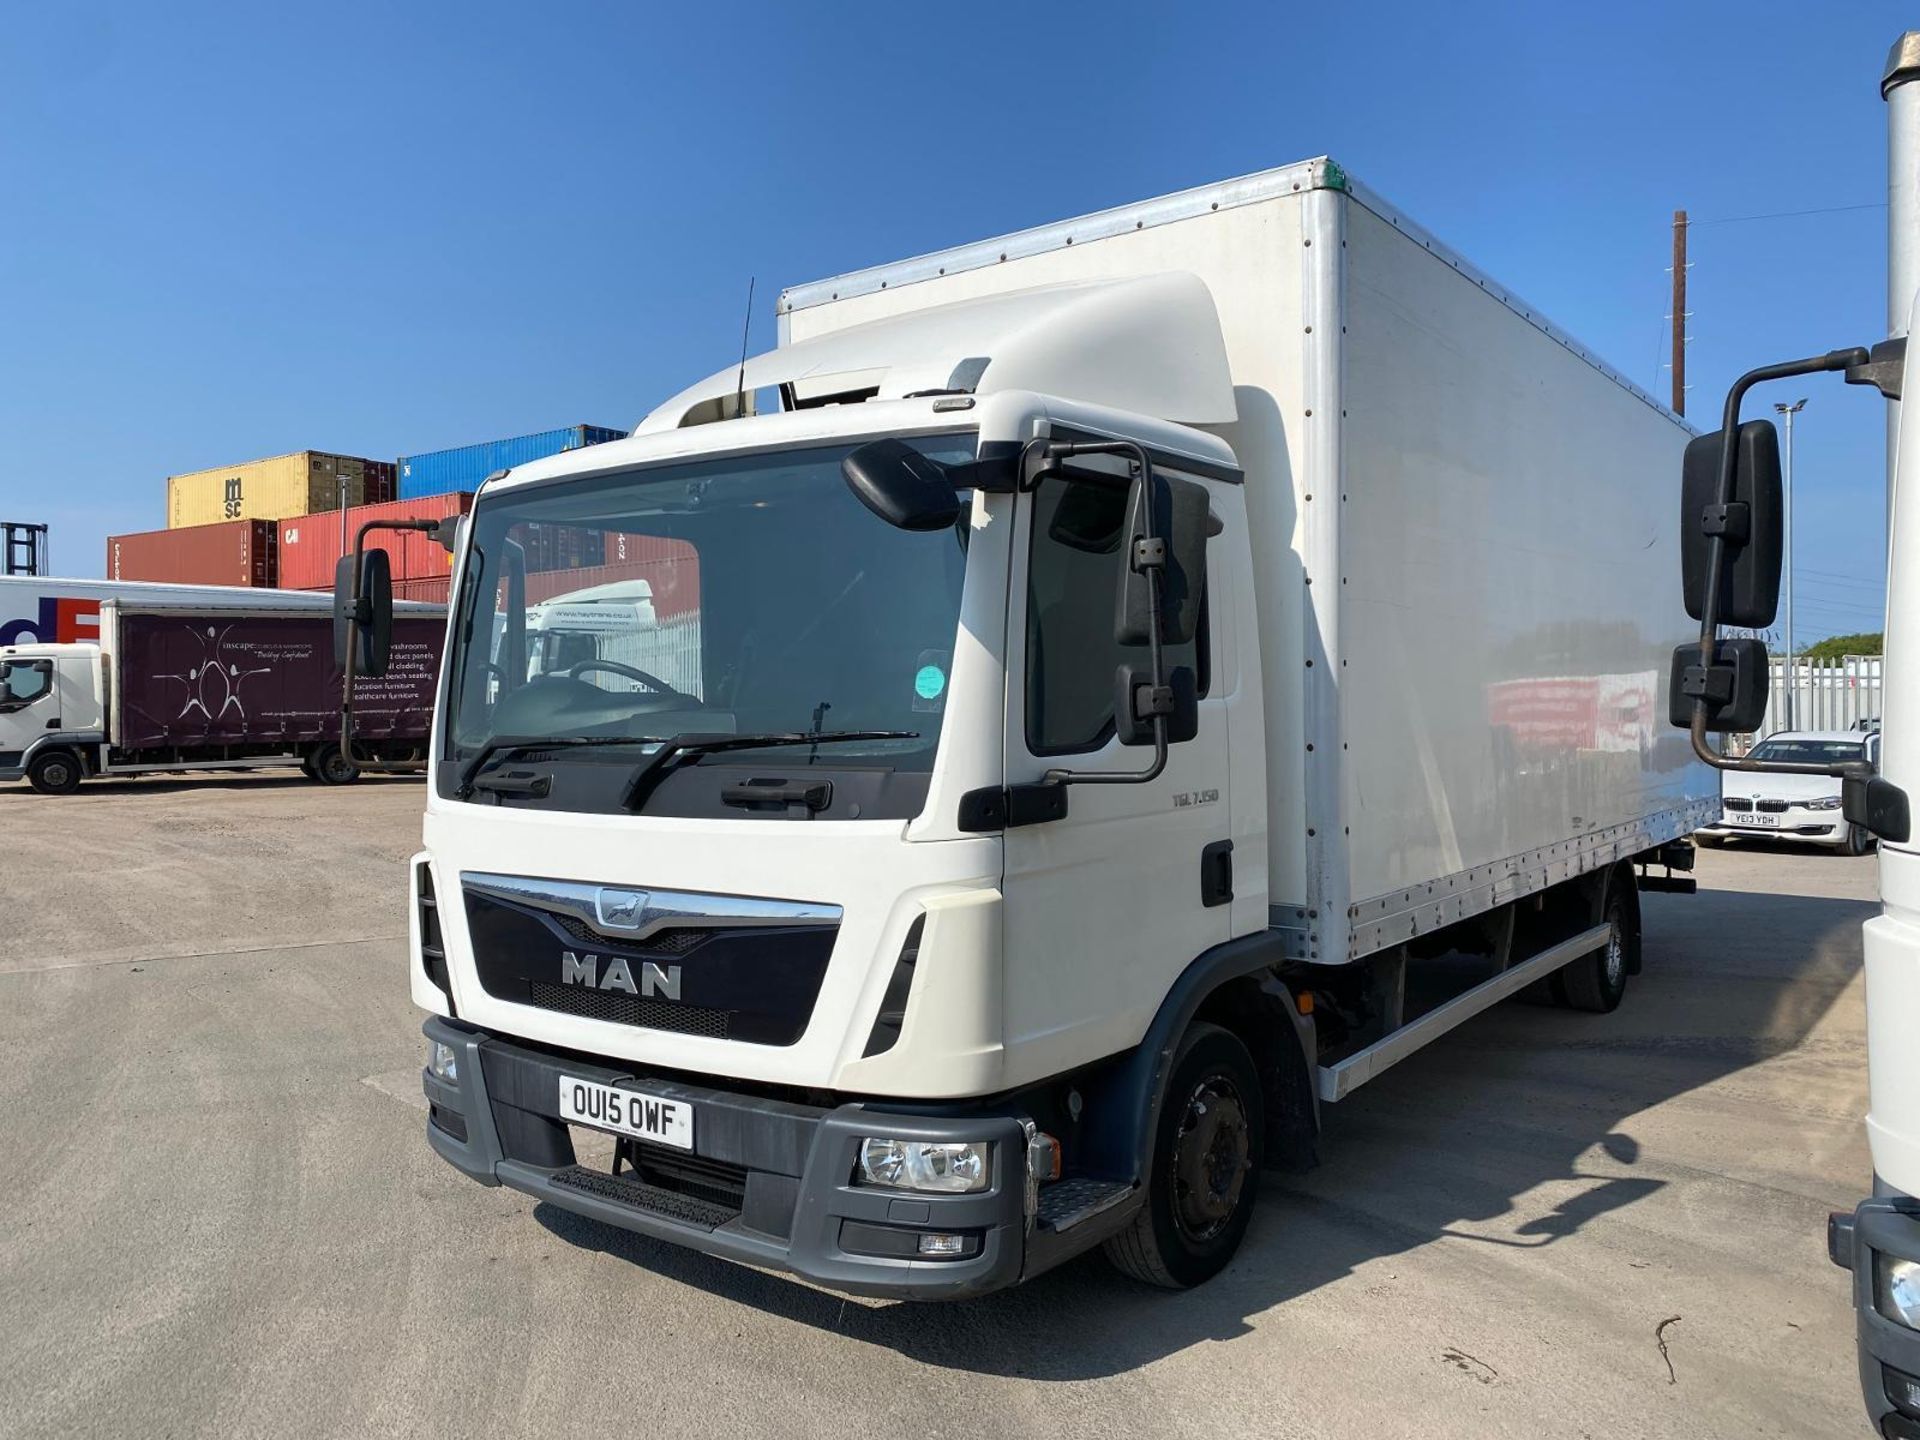 222/ 2015 MAN ERF TGL 7.150 7.5TON MANUAL EURO 6 ULEZ BOX TRUCK (CHOICE OF 2 - LISTING FOR ONE) - Image 12 of 12